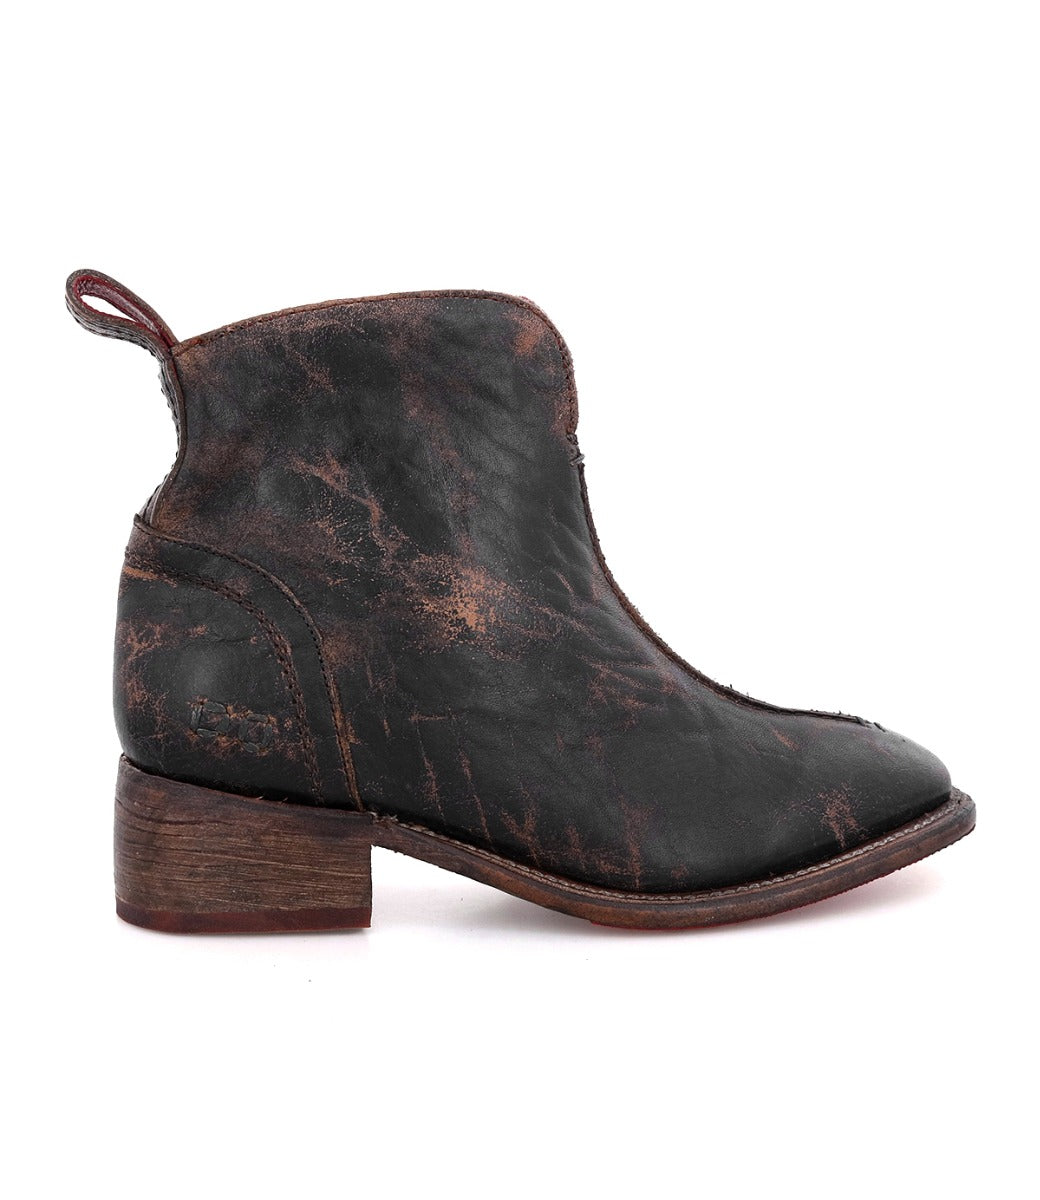 A black leather ankle boot with a wooden heel called the Tabitha by Bed Stu.